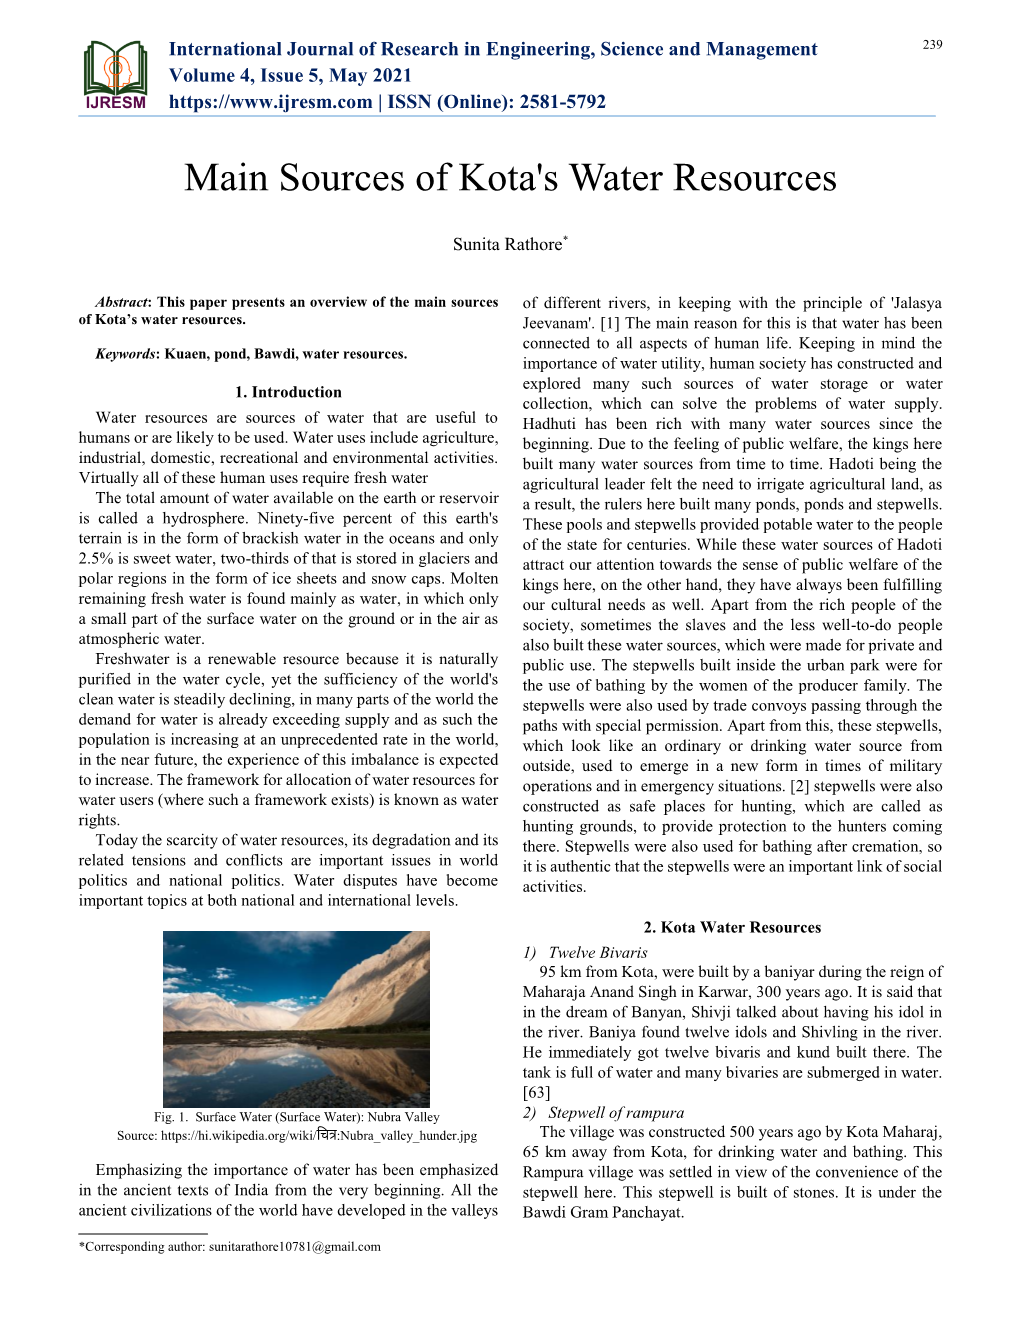 Main Sources of Kota's Water Resources